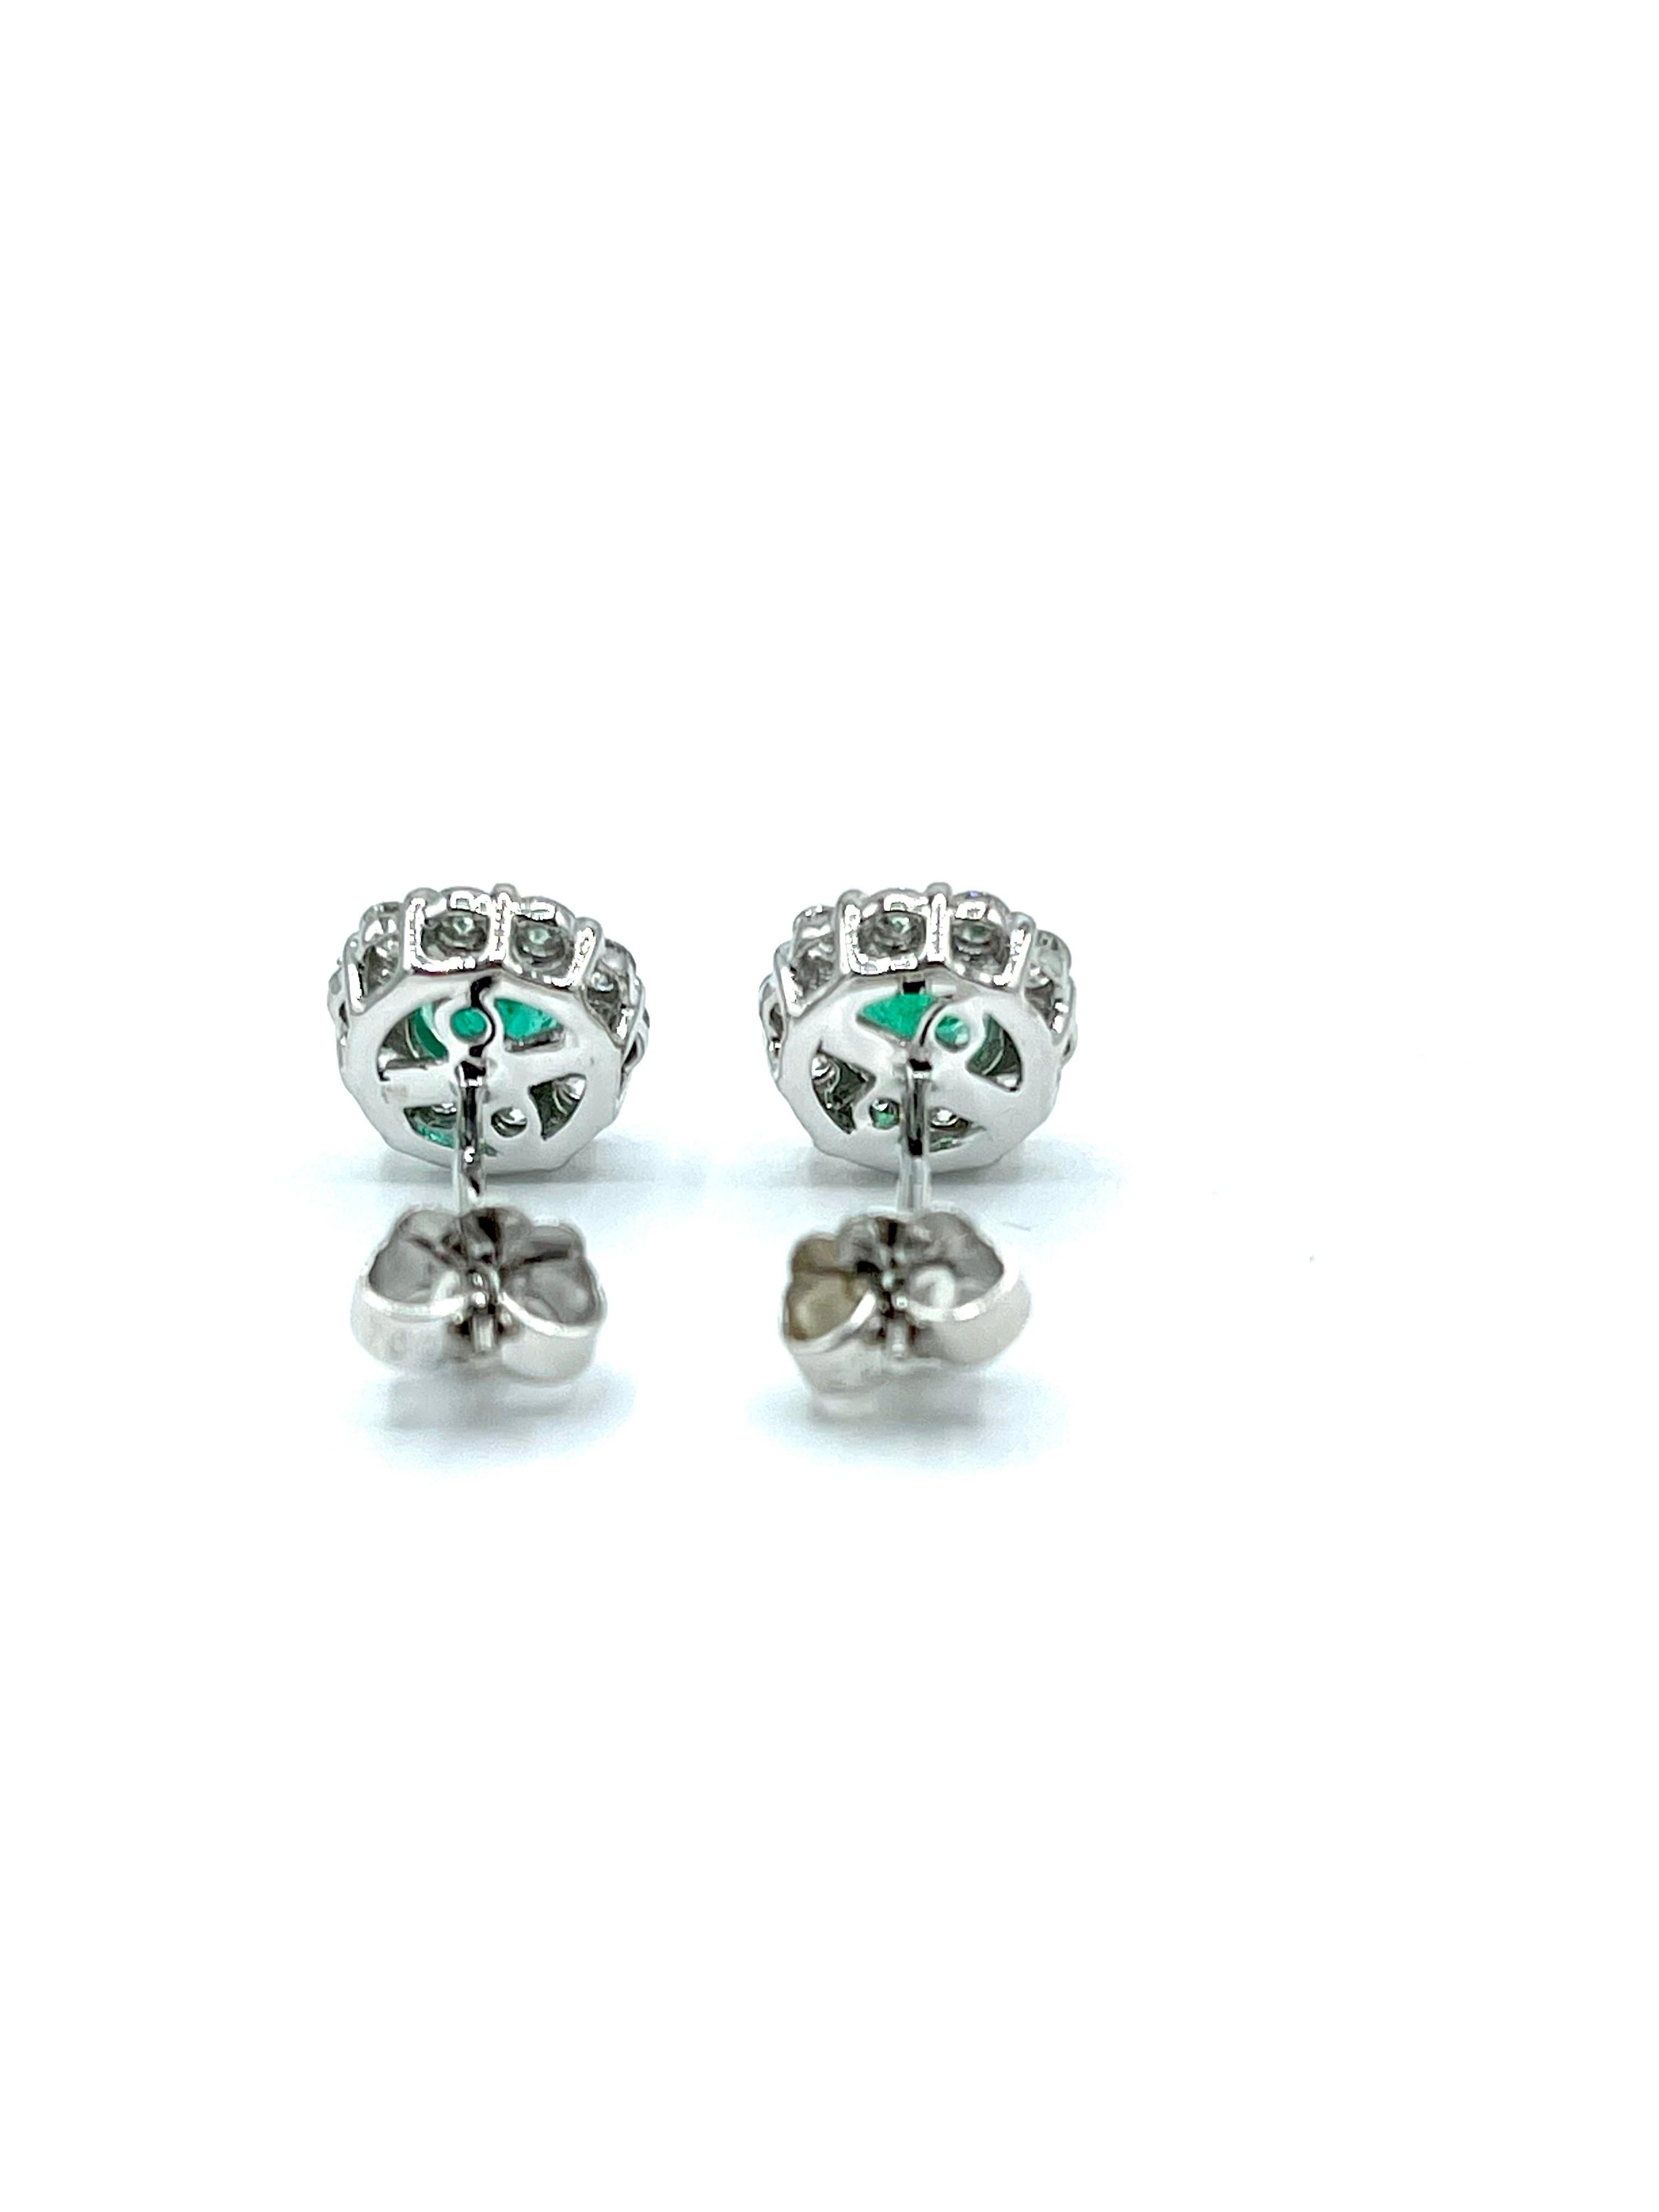 Women's or Men's 0.75 Carat Round Emerald and Diamond White Gold Stud Earrings